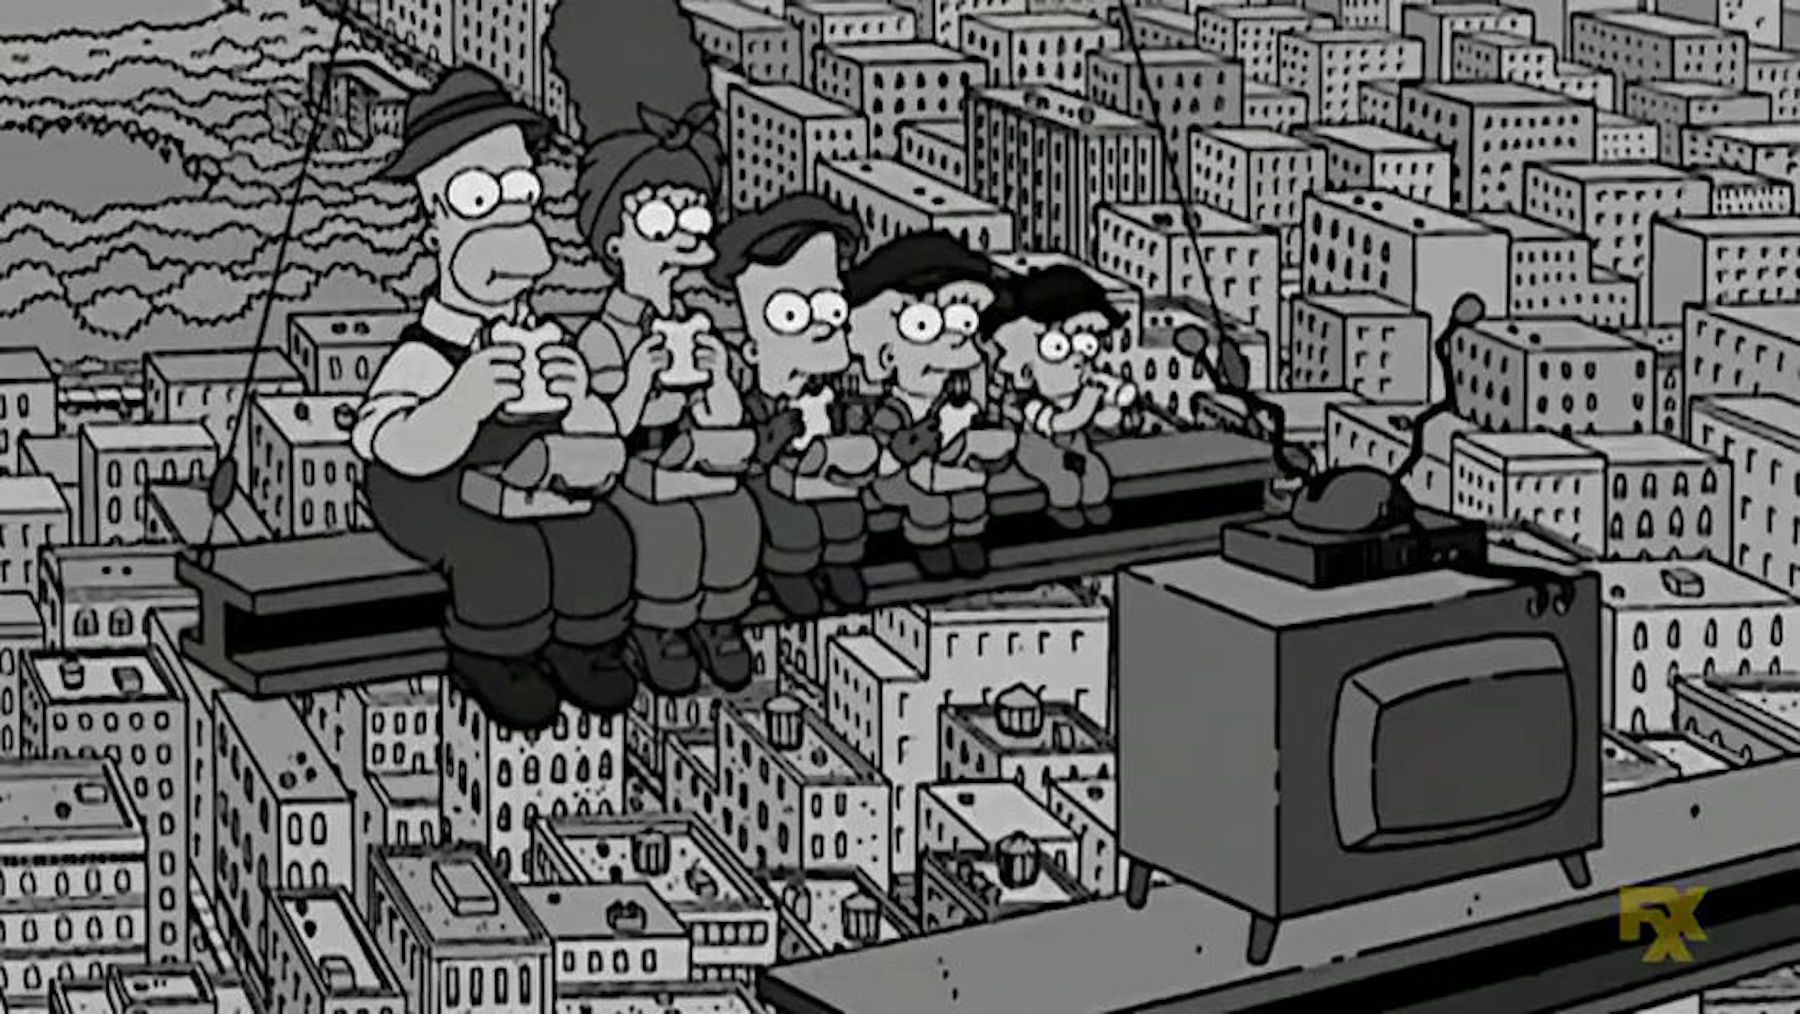 Black-and-white Simpsons intro gag, with family eating atop a 1920s girder instead of their couch.